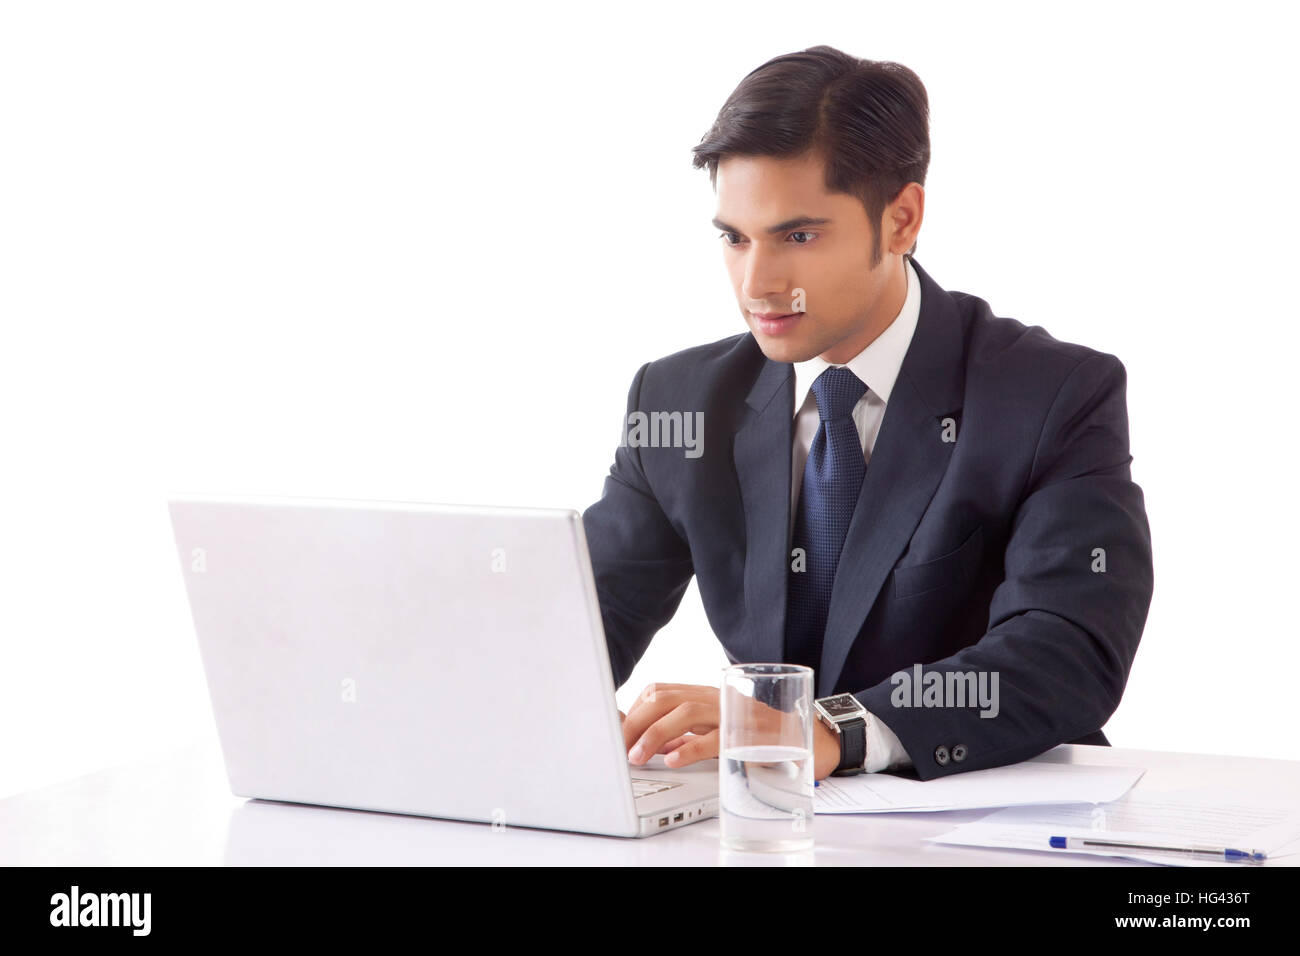 Young man working on laptop computer in office against white background Banque D'Images